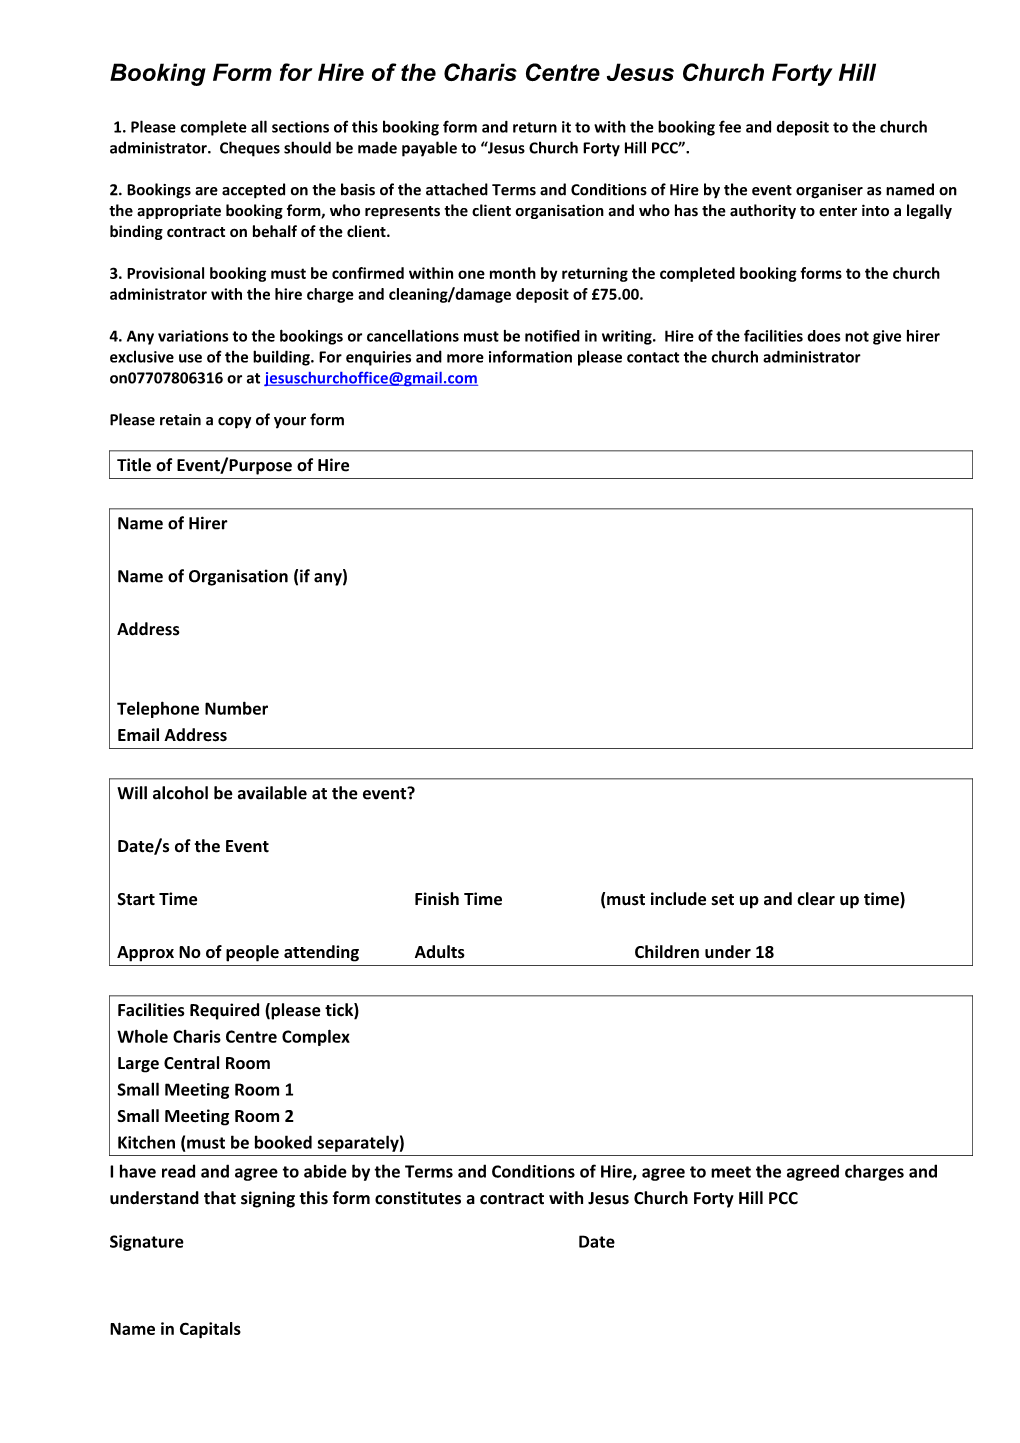 Booking Form for Hire of the Charis Centre Jesus Church Forty Hill